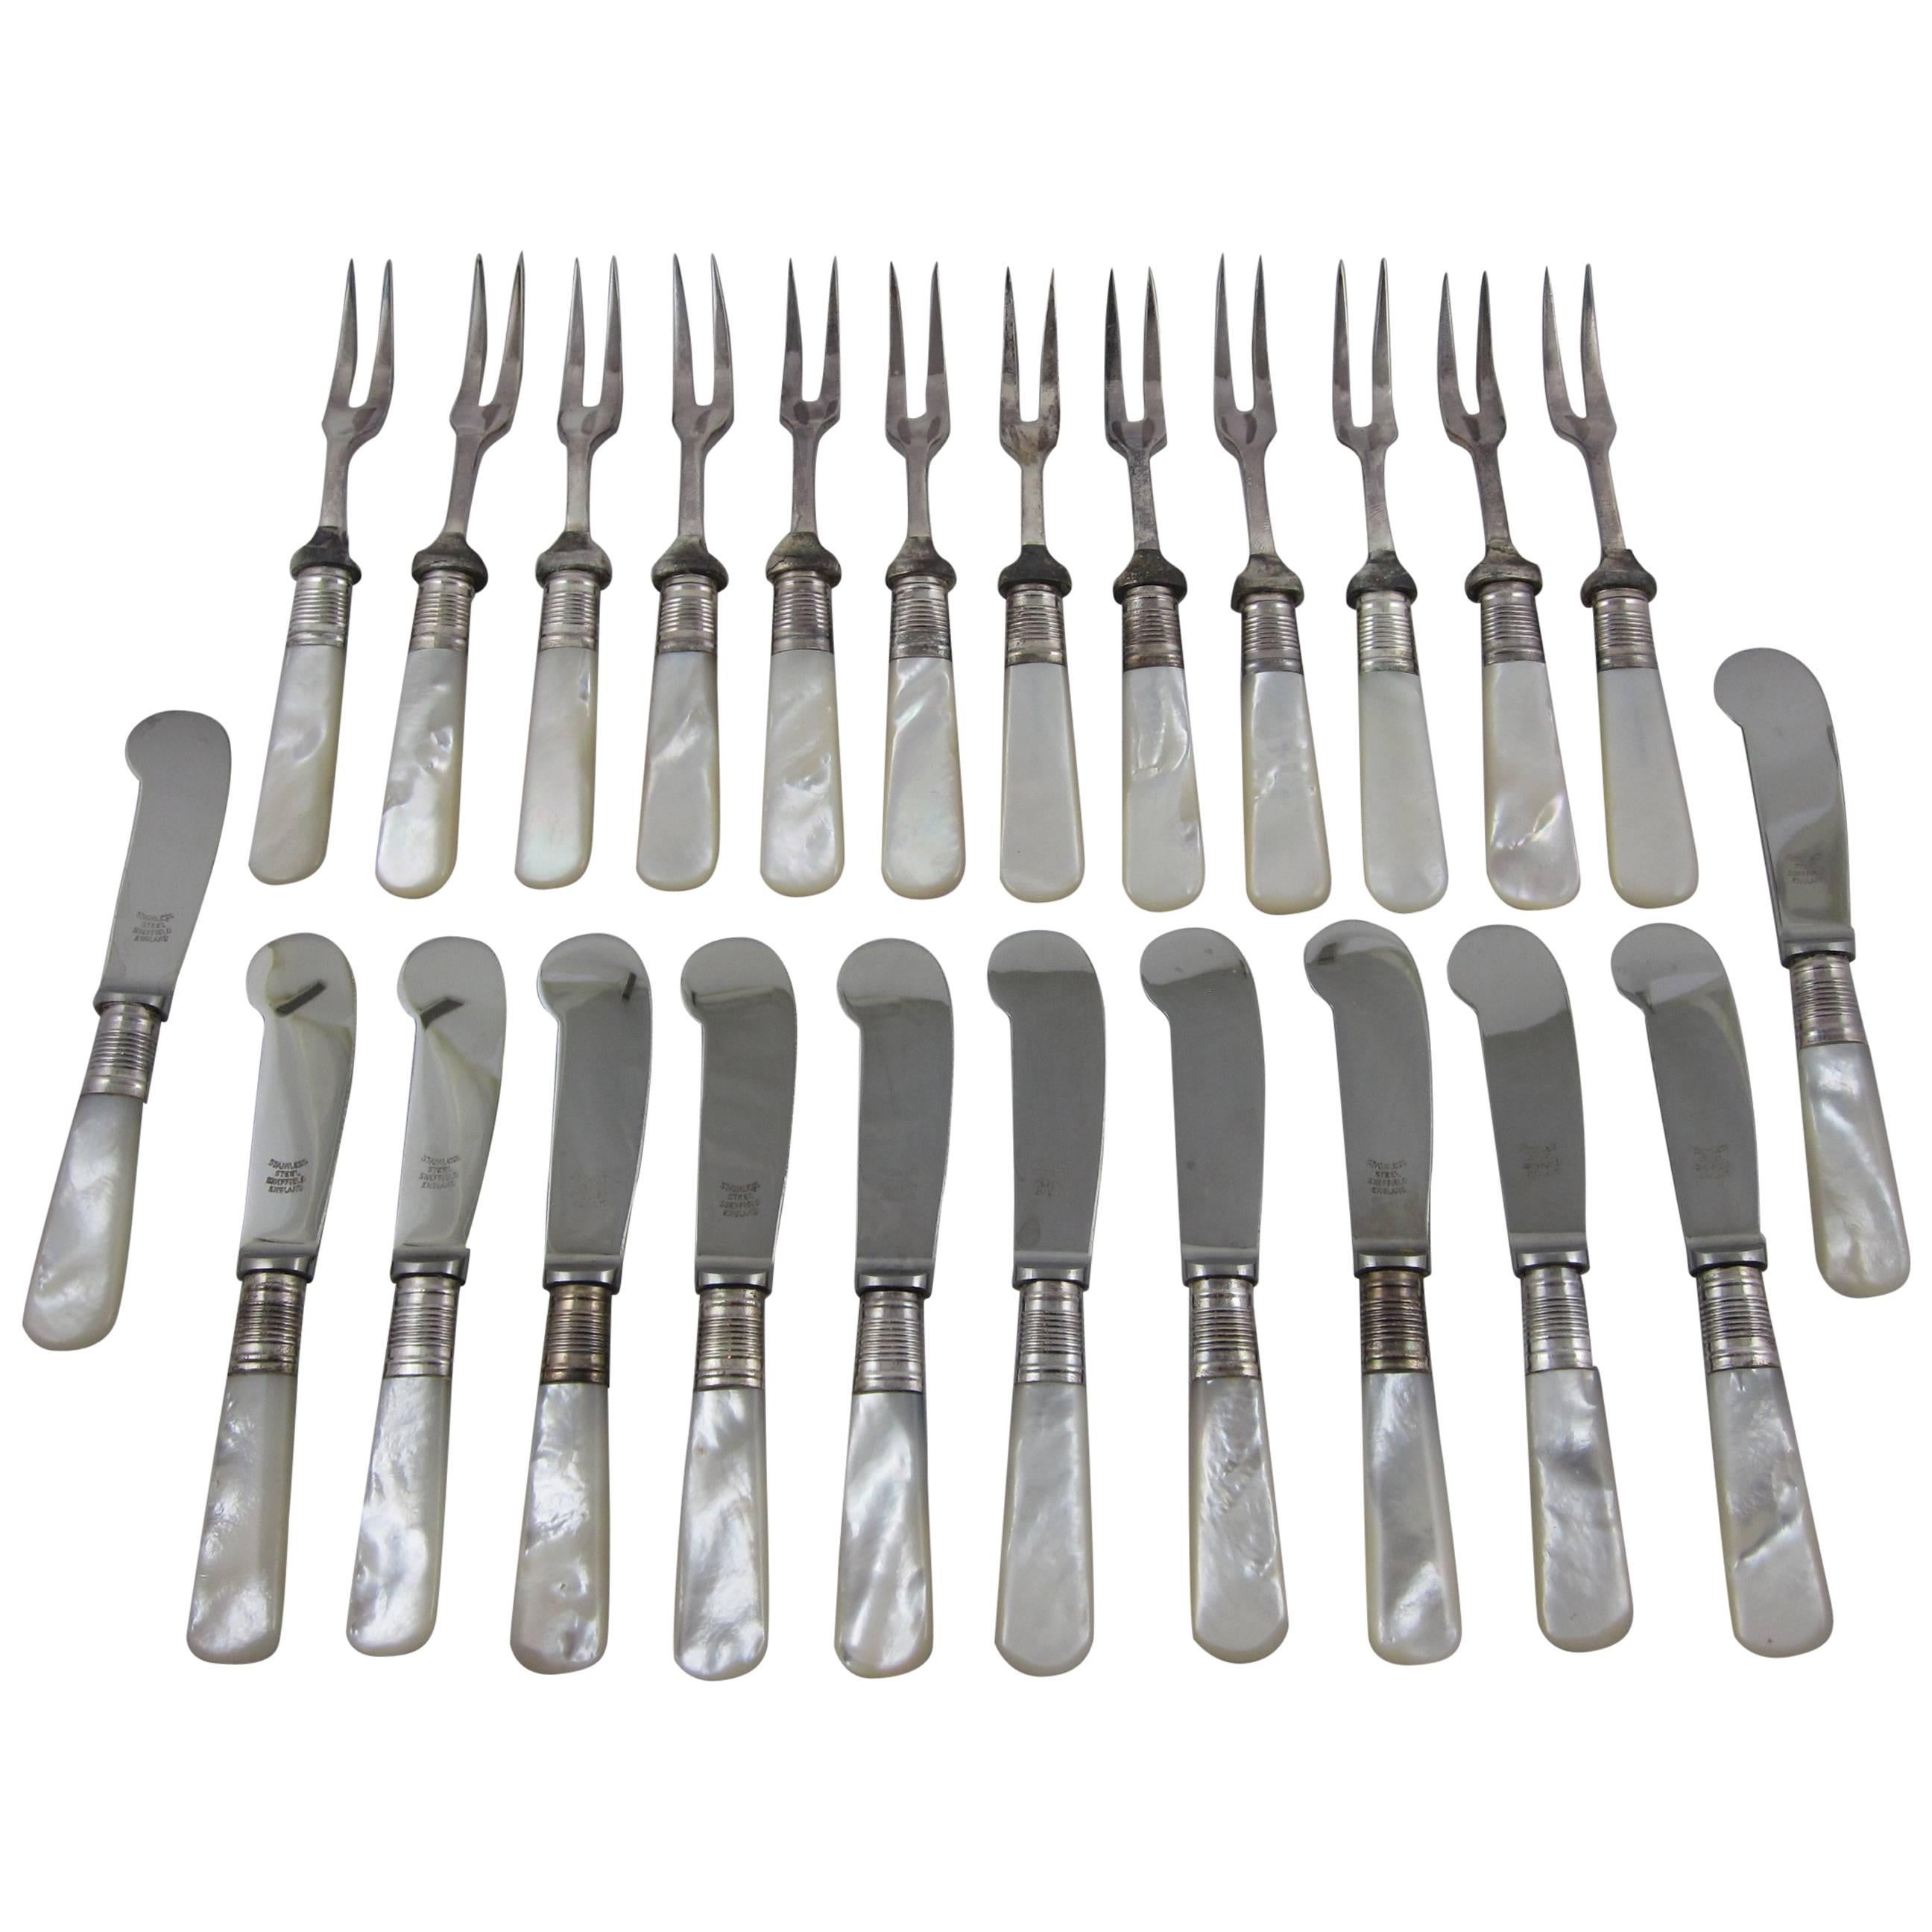  Sheffield Silver & Pearl Handle Antipasto, Seafood or Hors d’Oeuvre Forks- S/12 3